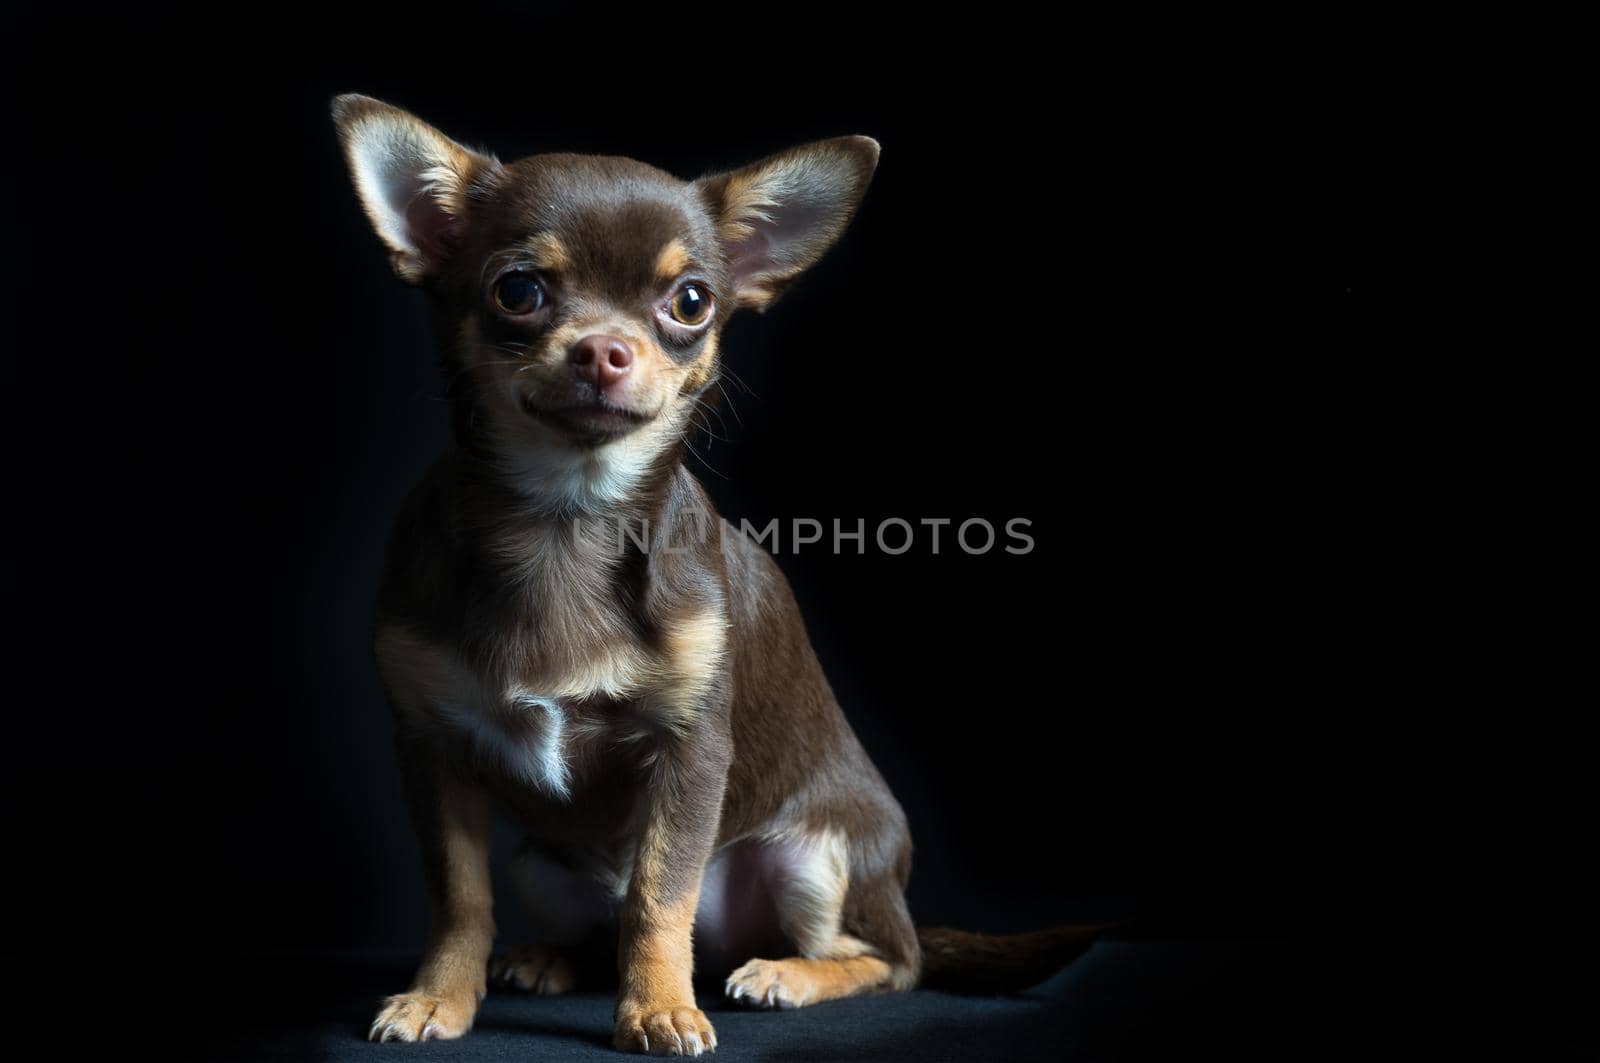 Little multi-colored chihuahua in black background by LeoniekvanderVliet